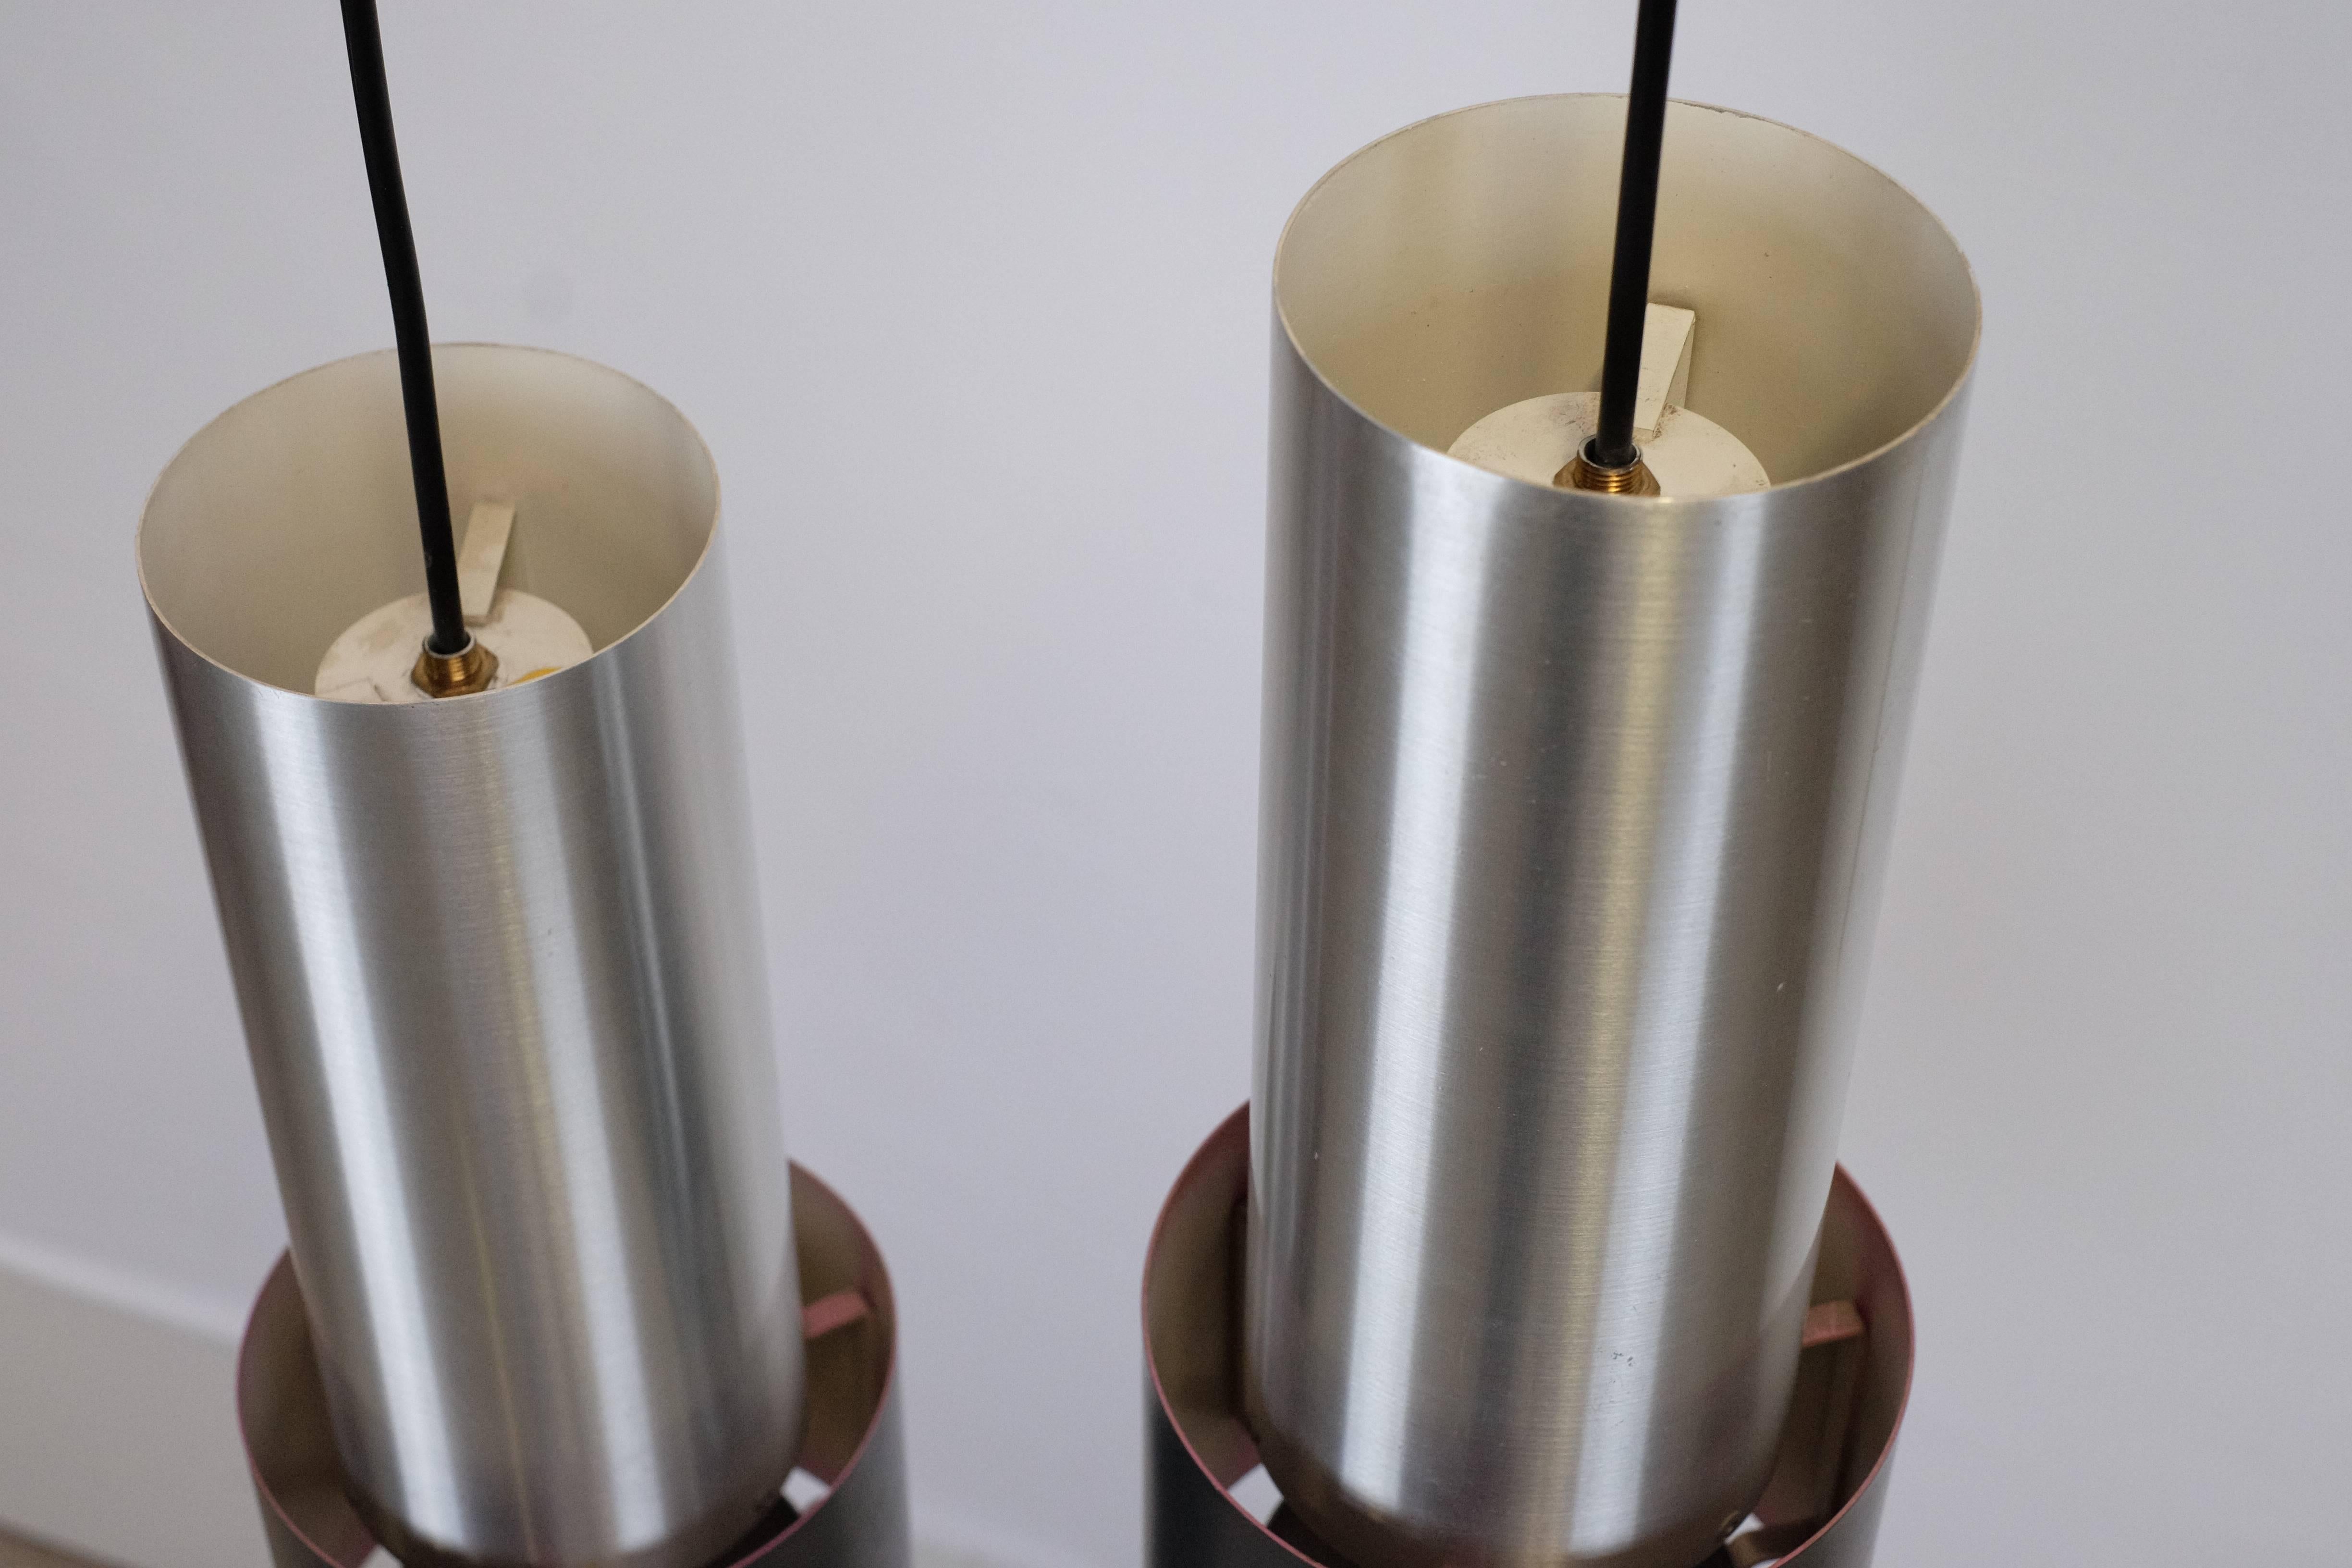 Pair of Zenith Lamps Designed by Jo Hammerborg, Produced by Fog & Mørup in 1967 1